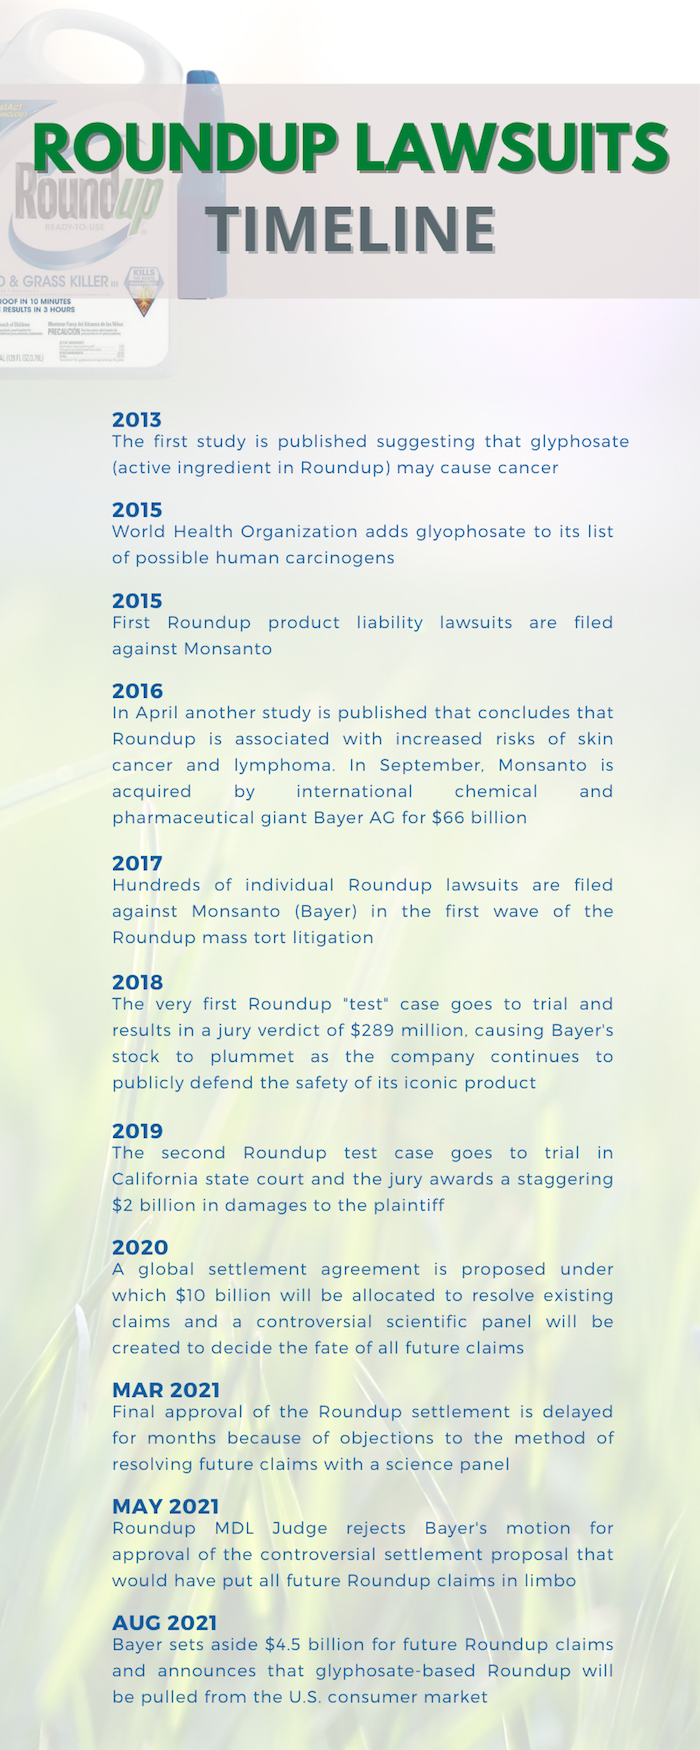 Roundup Lawsuits Timeline